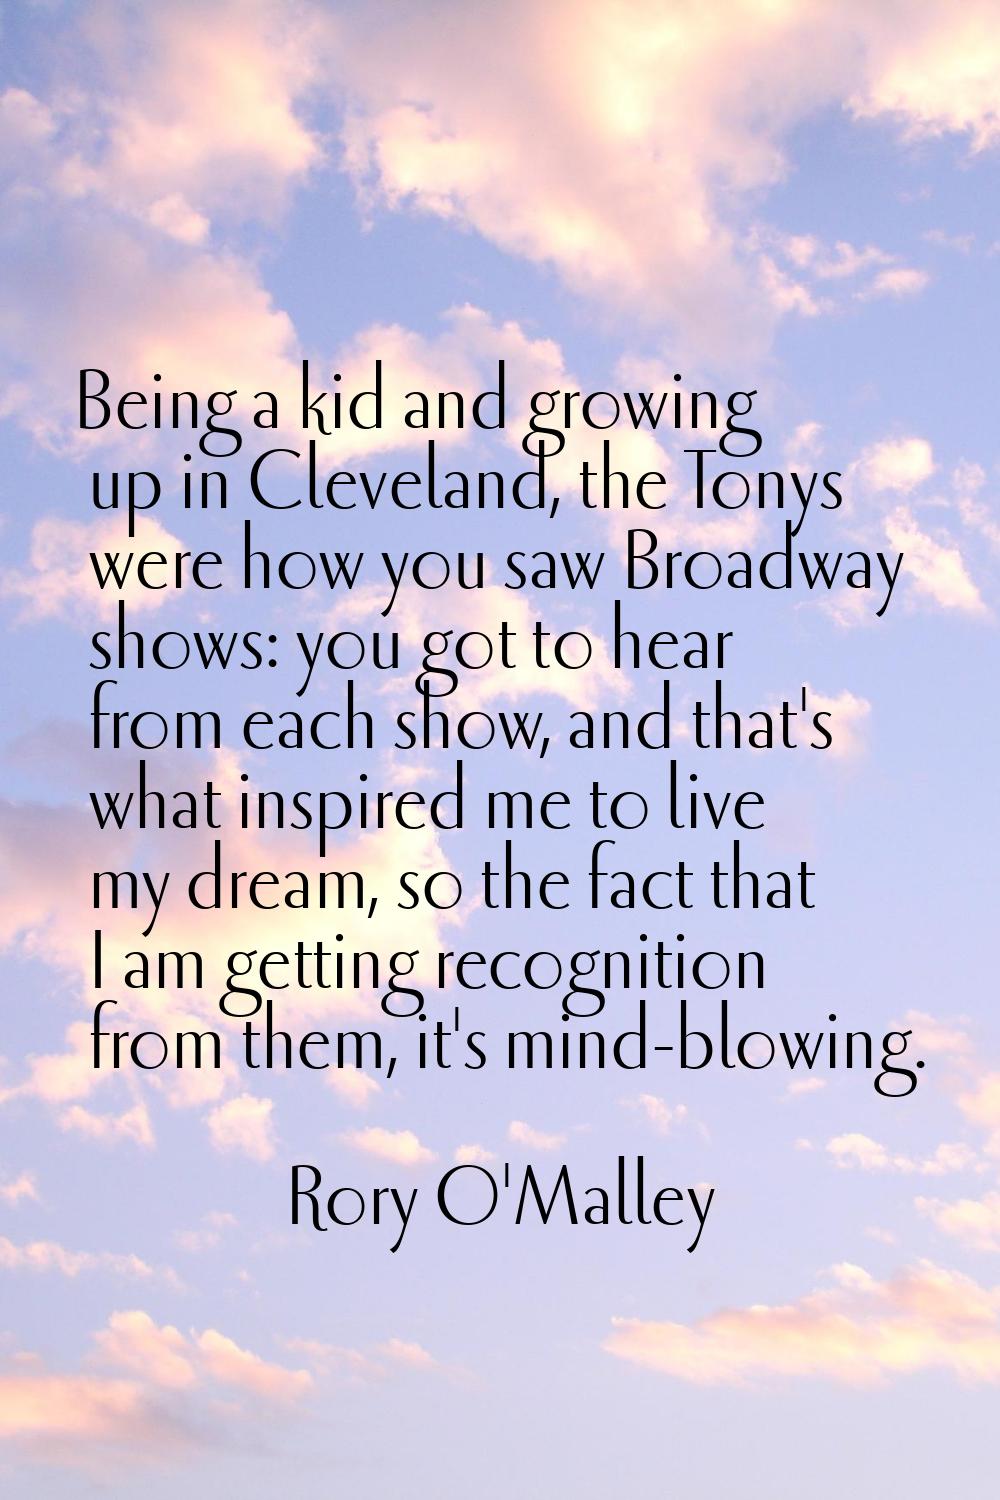 Being a kid and growing up in Cleveland, the Tonys were how you saw Broadway shows: you got to hear